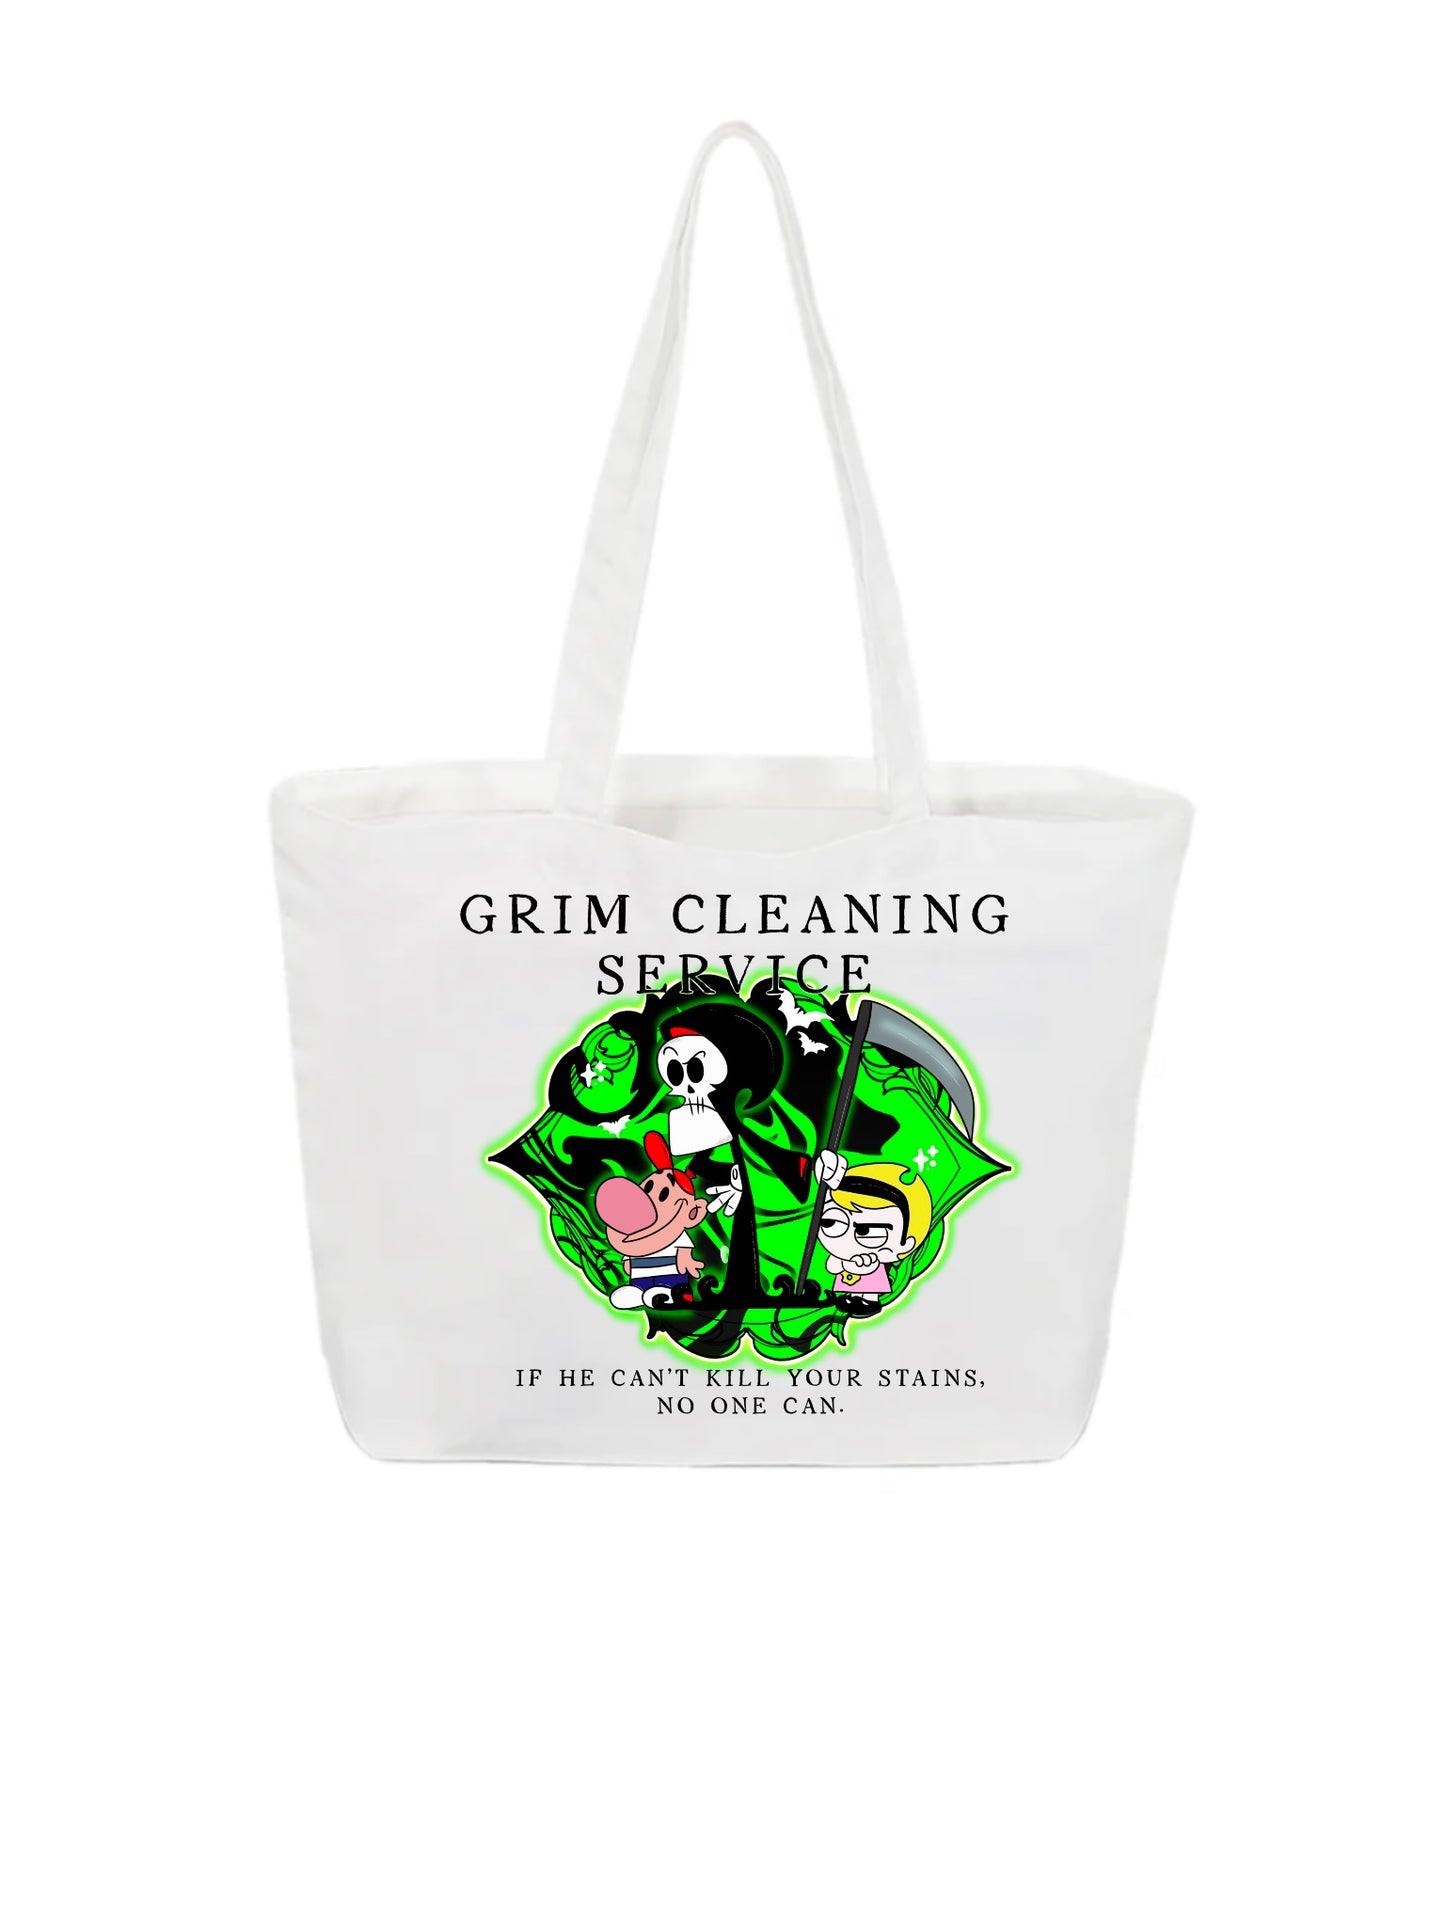 Grim Cleaning Service tote bag